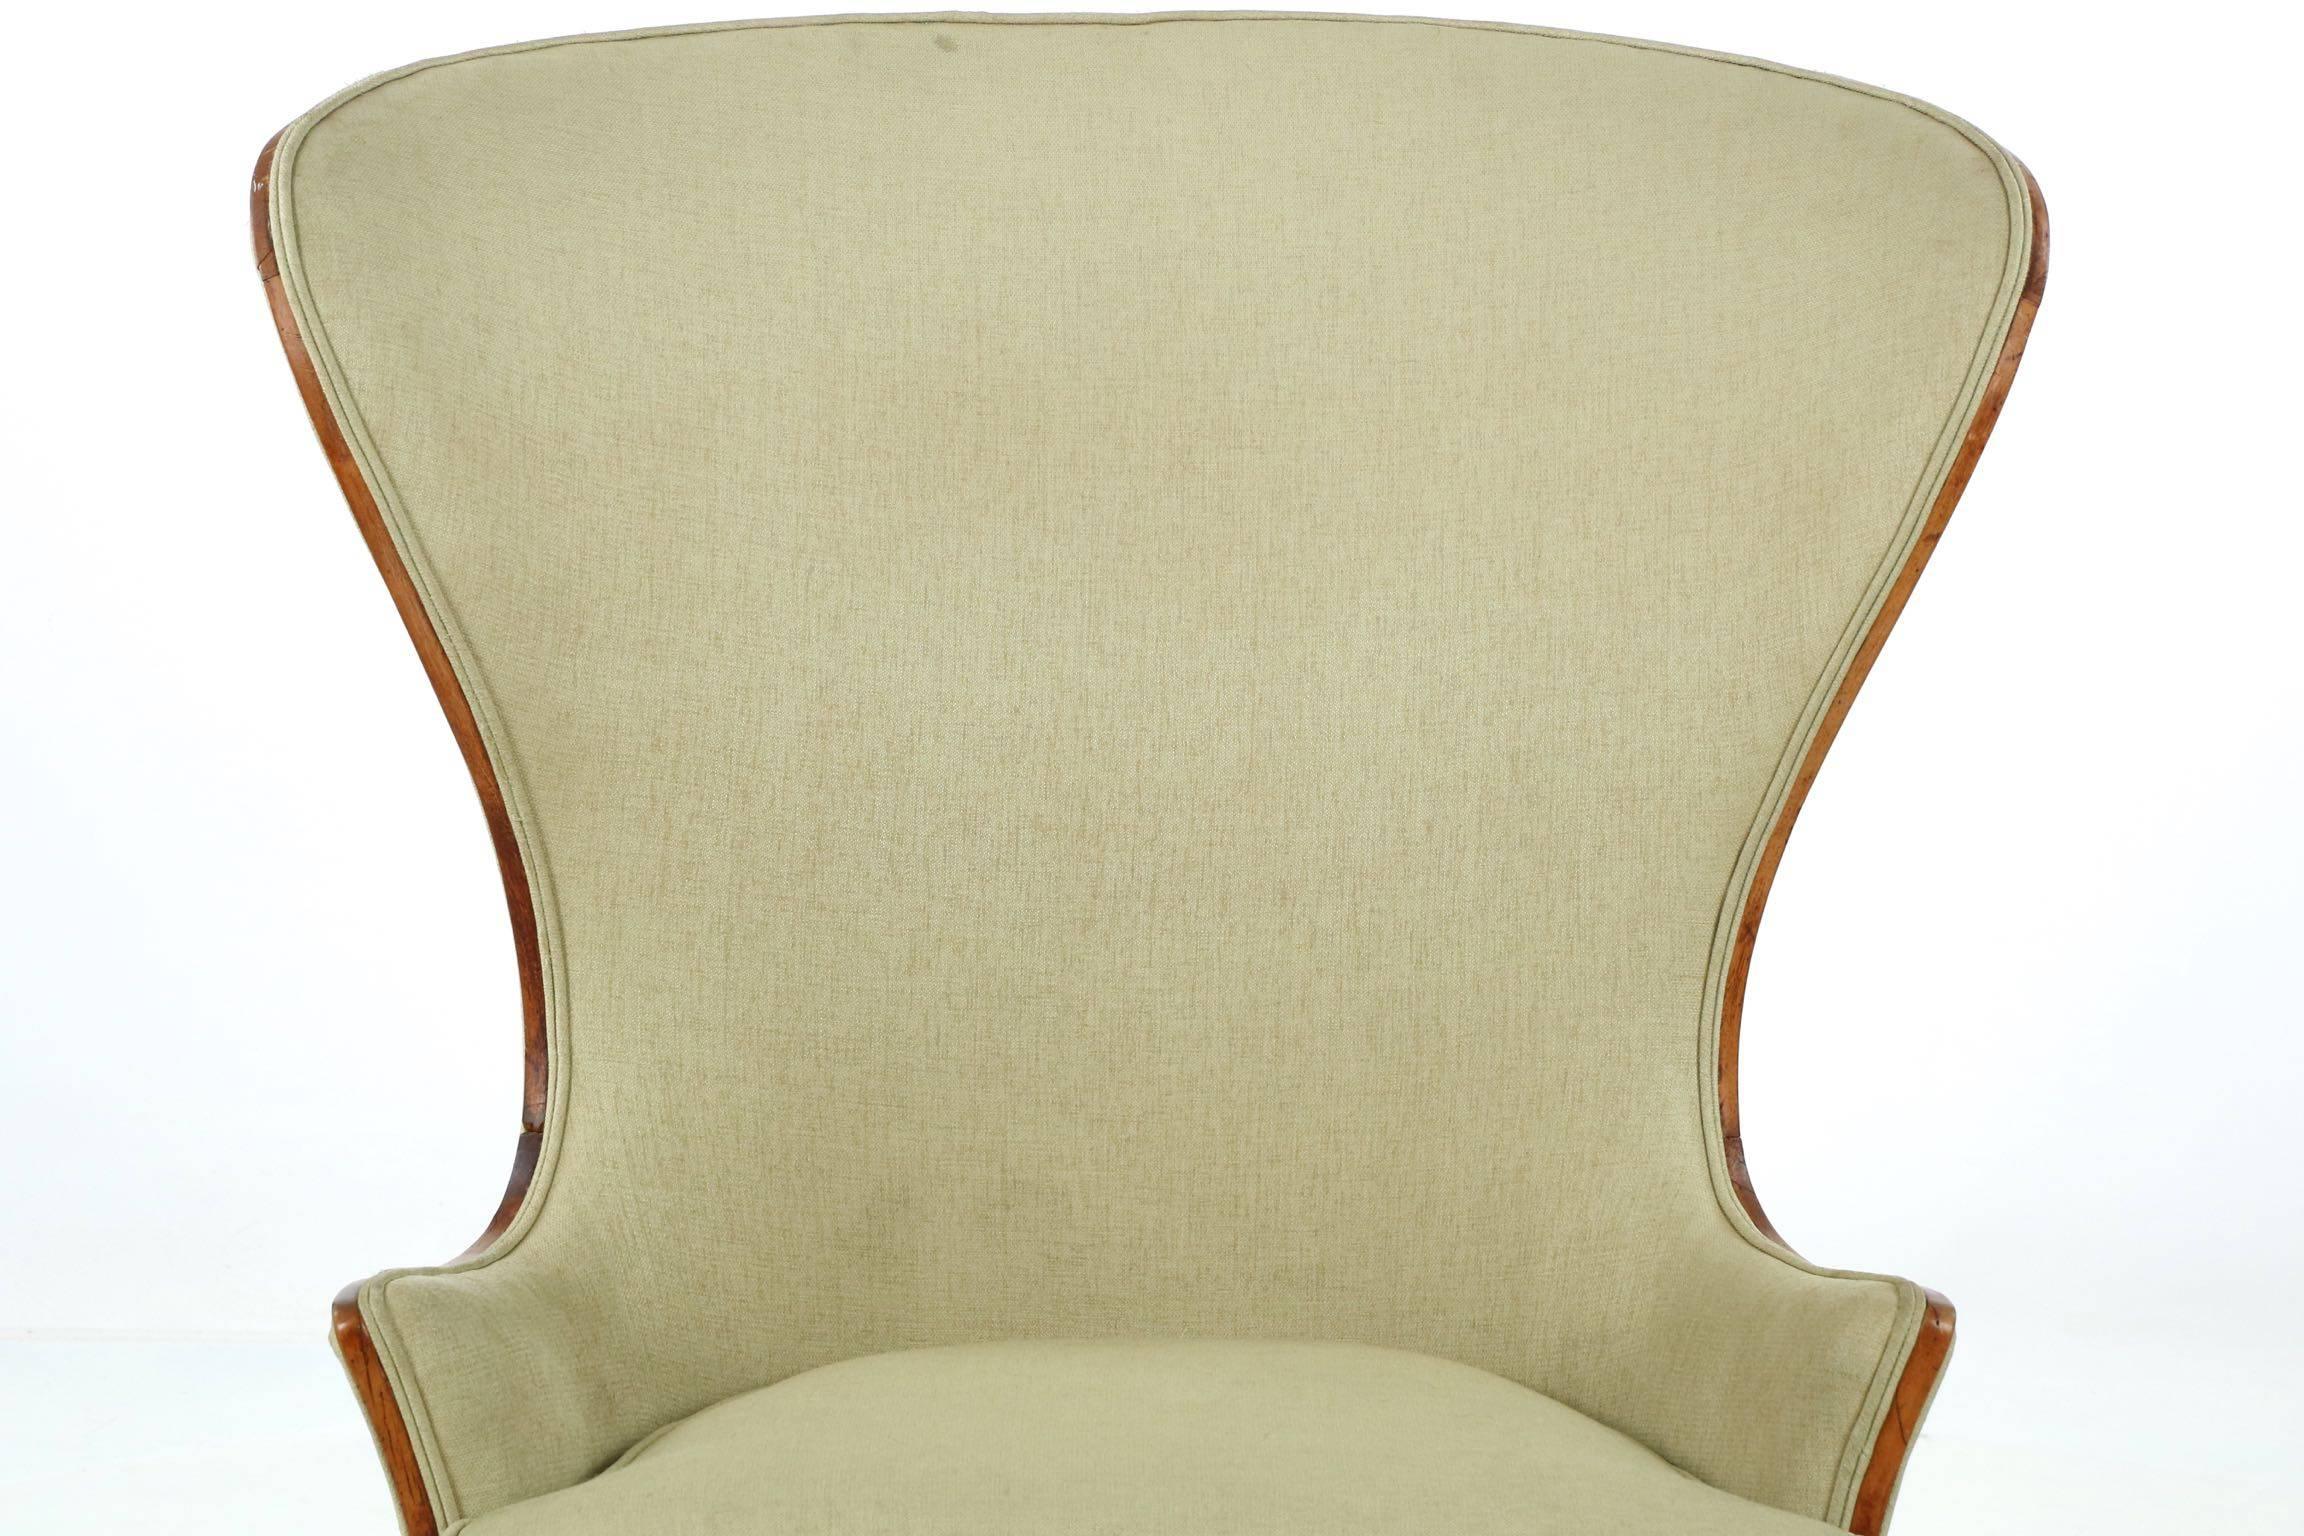 This is a chair that is well ahead of it’s time, the bold and incredibly powerful curvature of the back more reminiscent of the Danish designs of the Mid-Century than a work of art from the late 19th century. A tasteful woven green upholstery lends